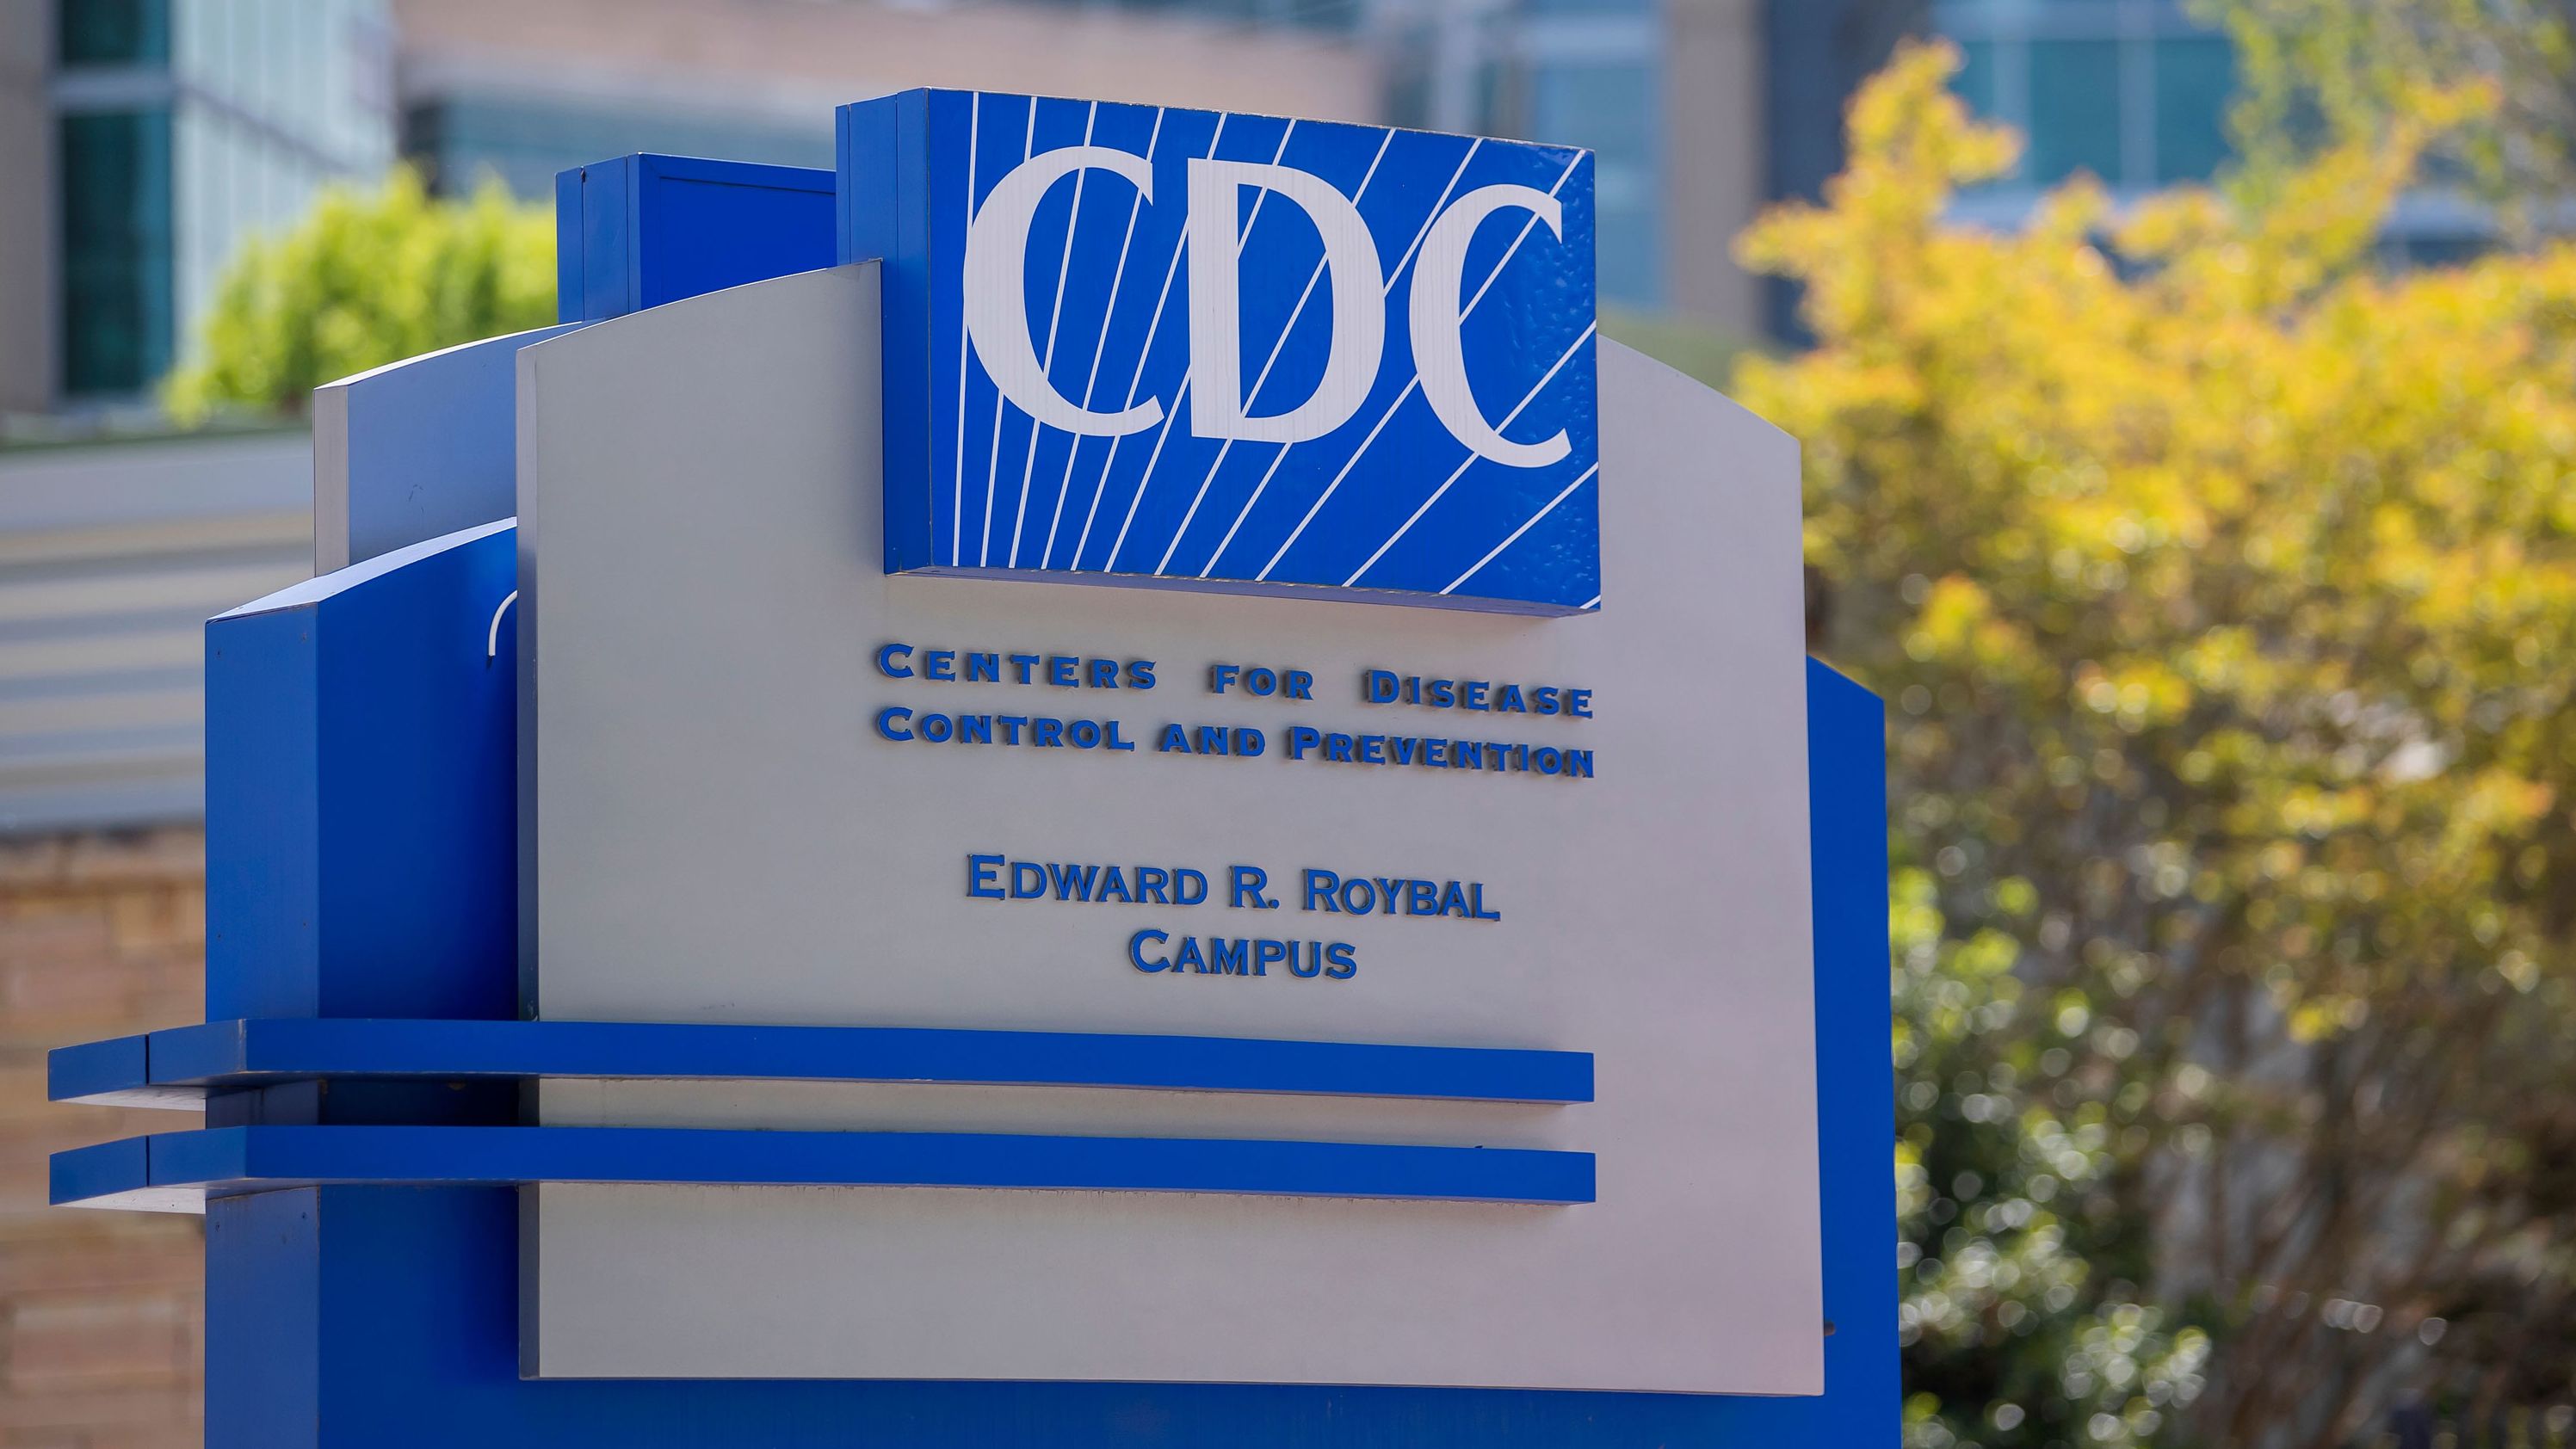 CDC officials announced limited travel restrictions to people coming from the Democratic Republic of Congo and Guinea.